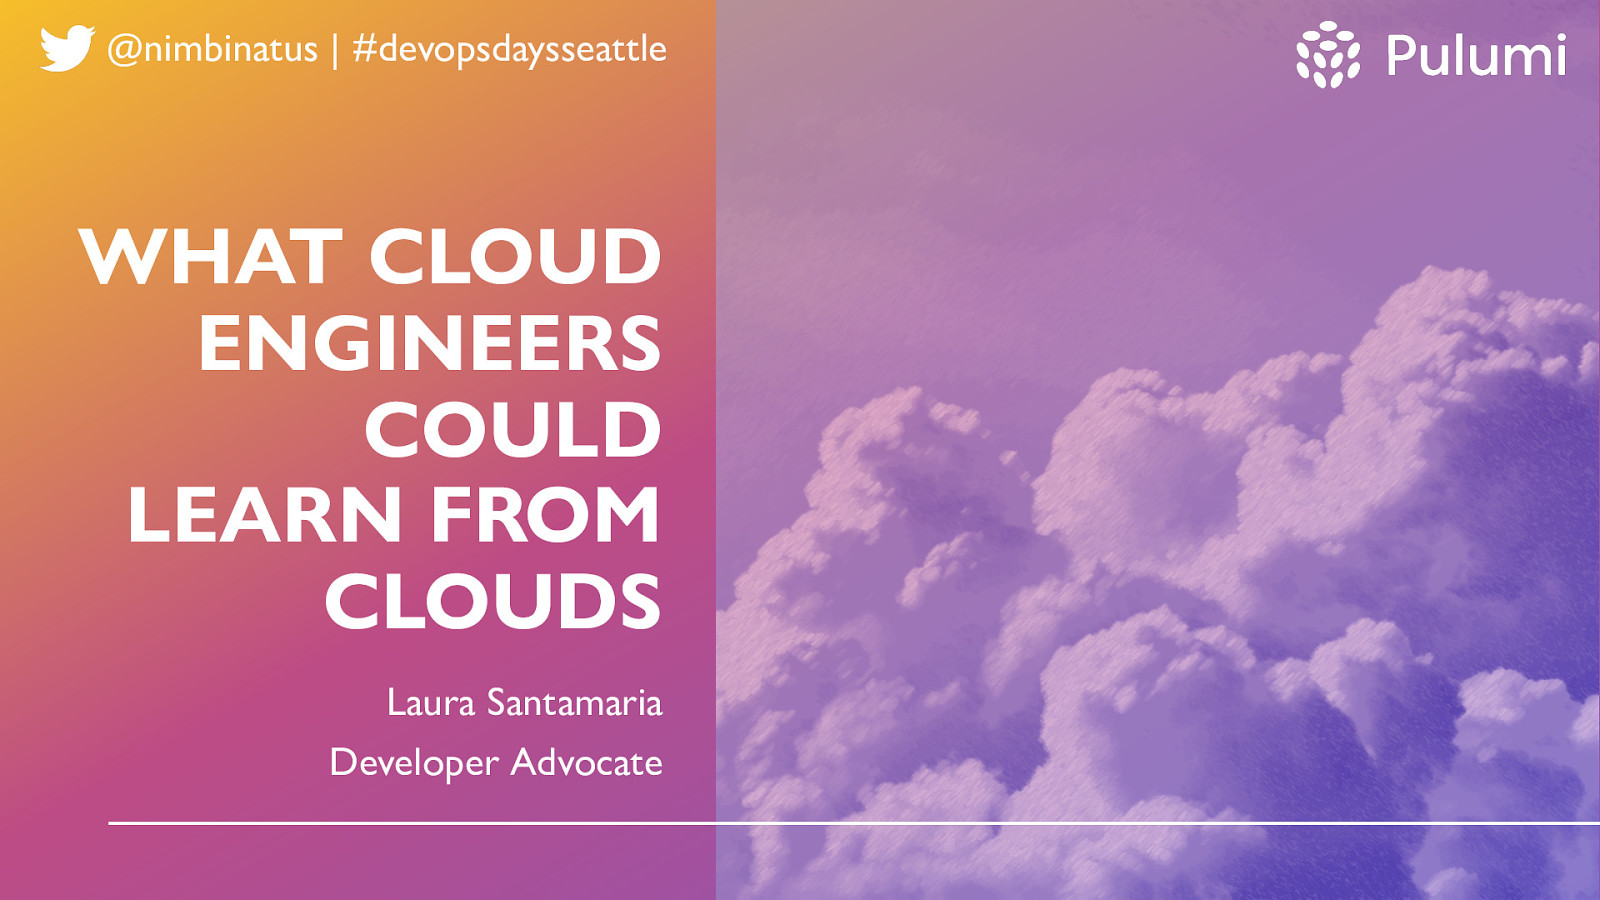 What Cloud Engineers Could Learn from Clouds